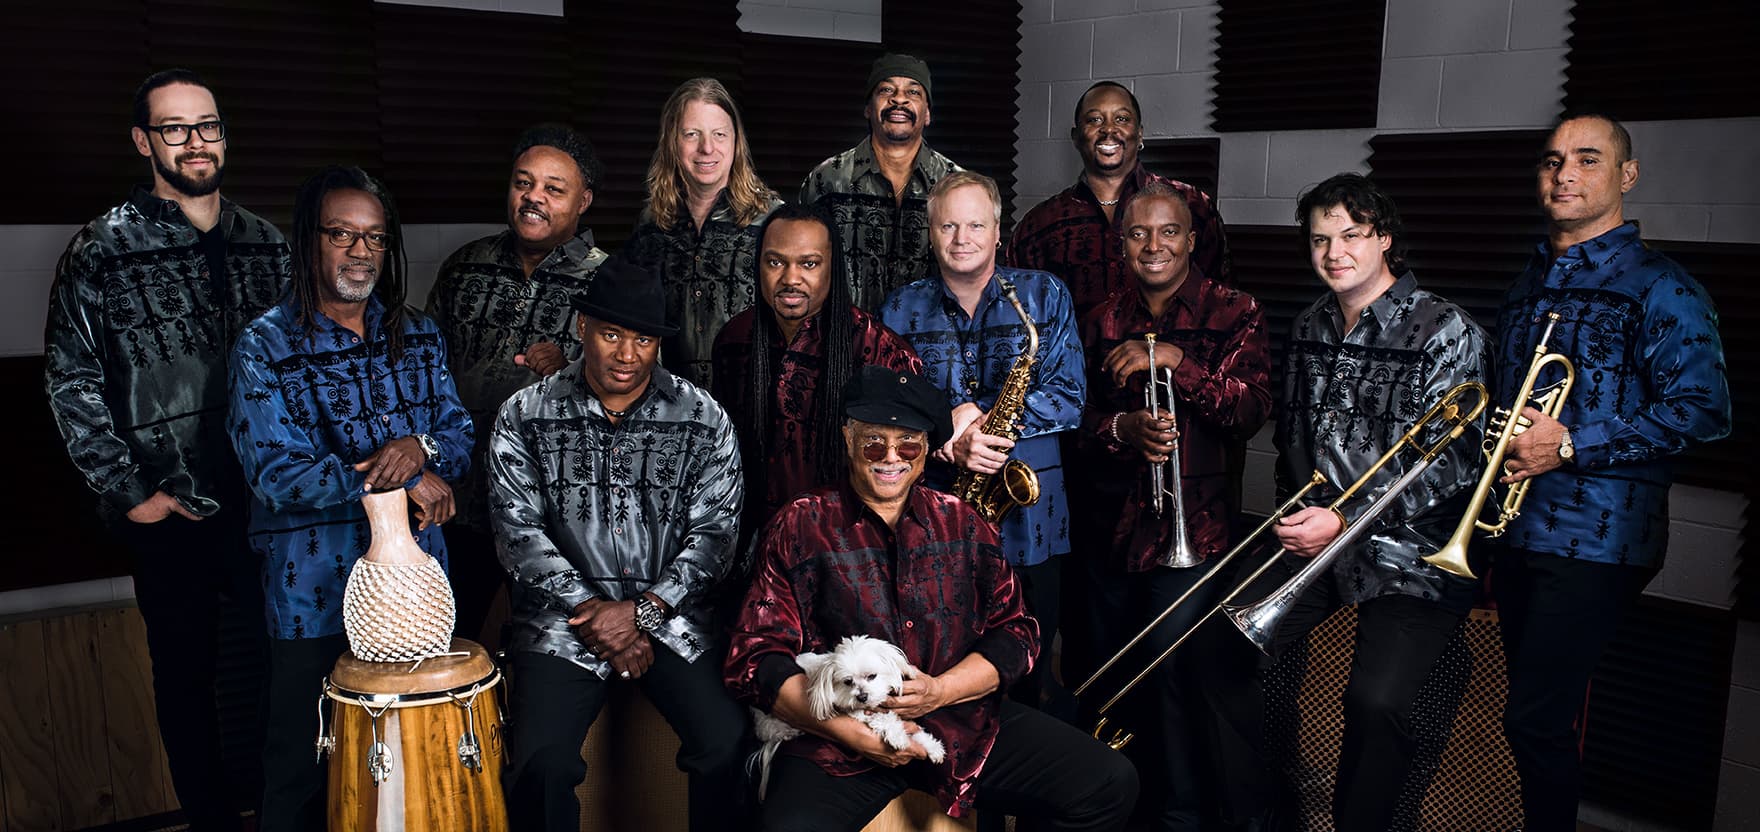 Earth, Wind and Fire Experience by Al McKay Image 1